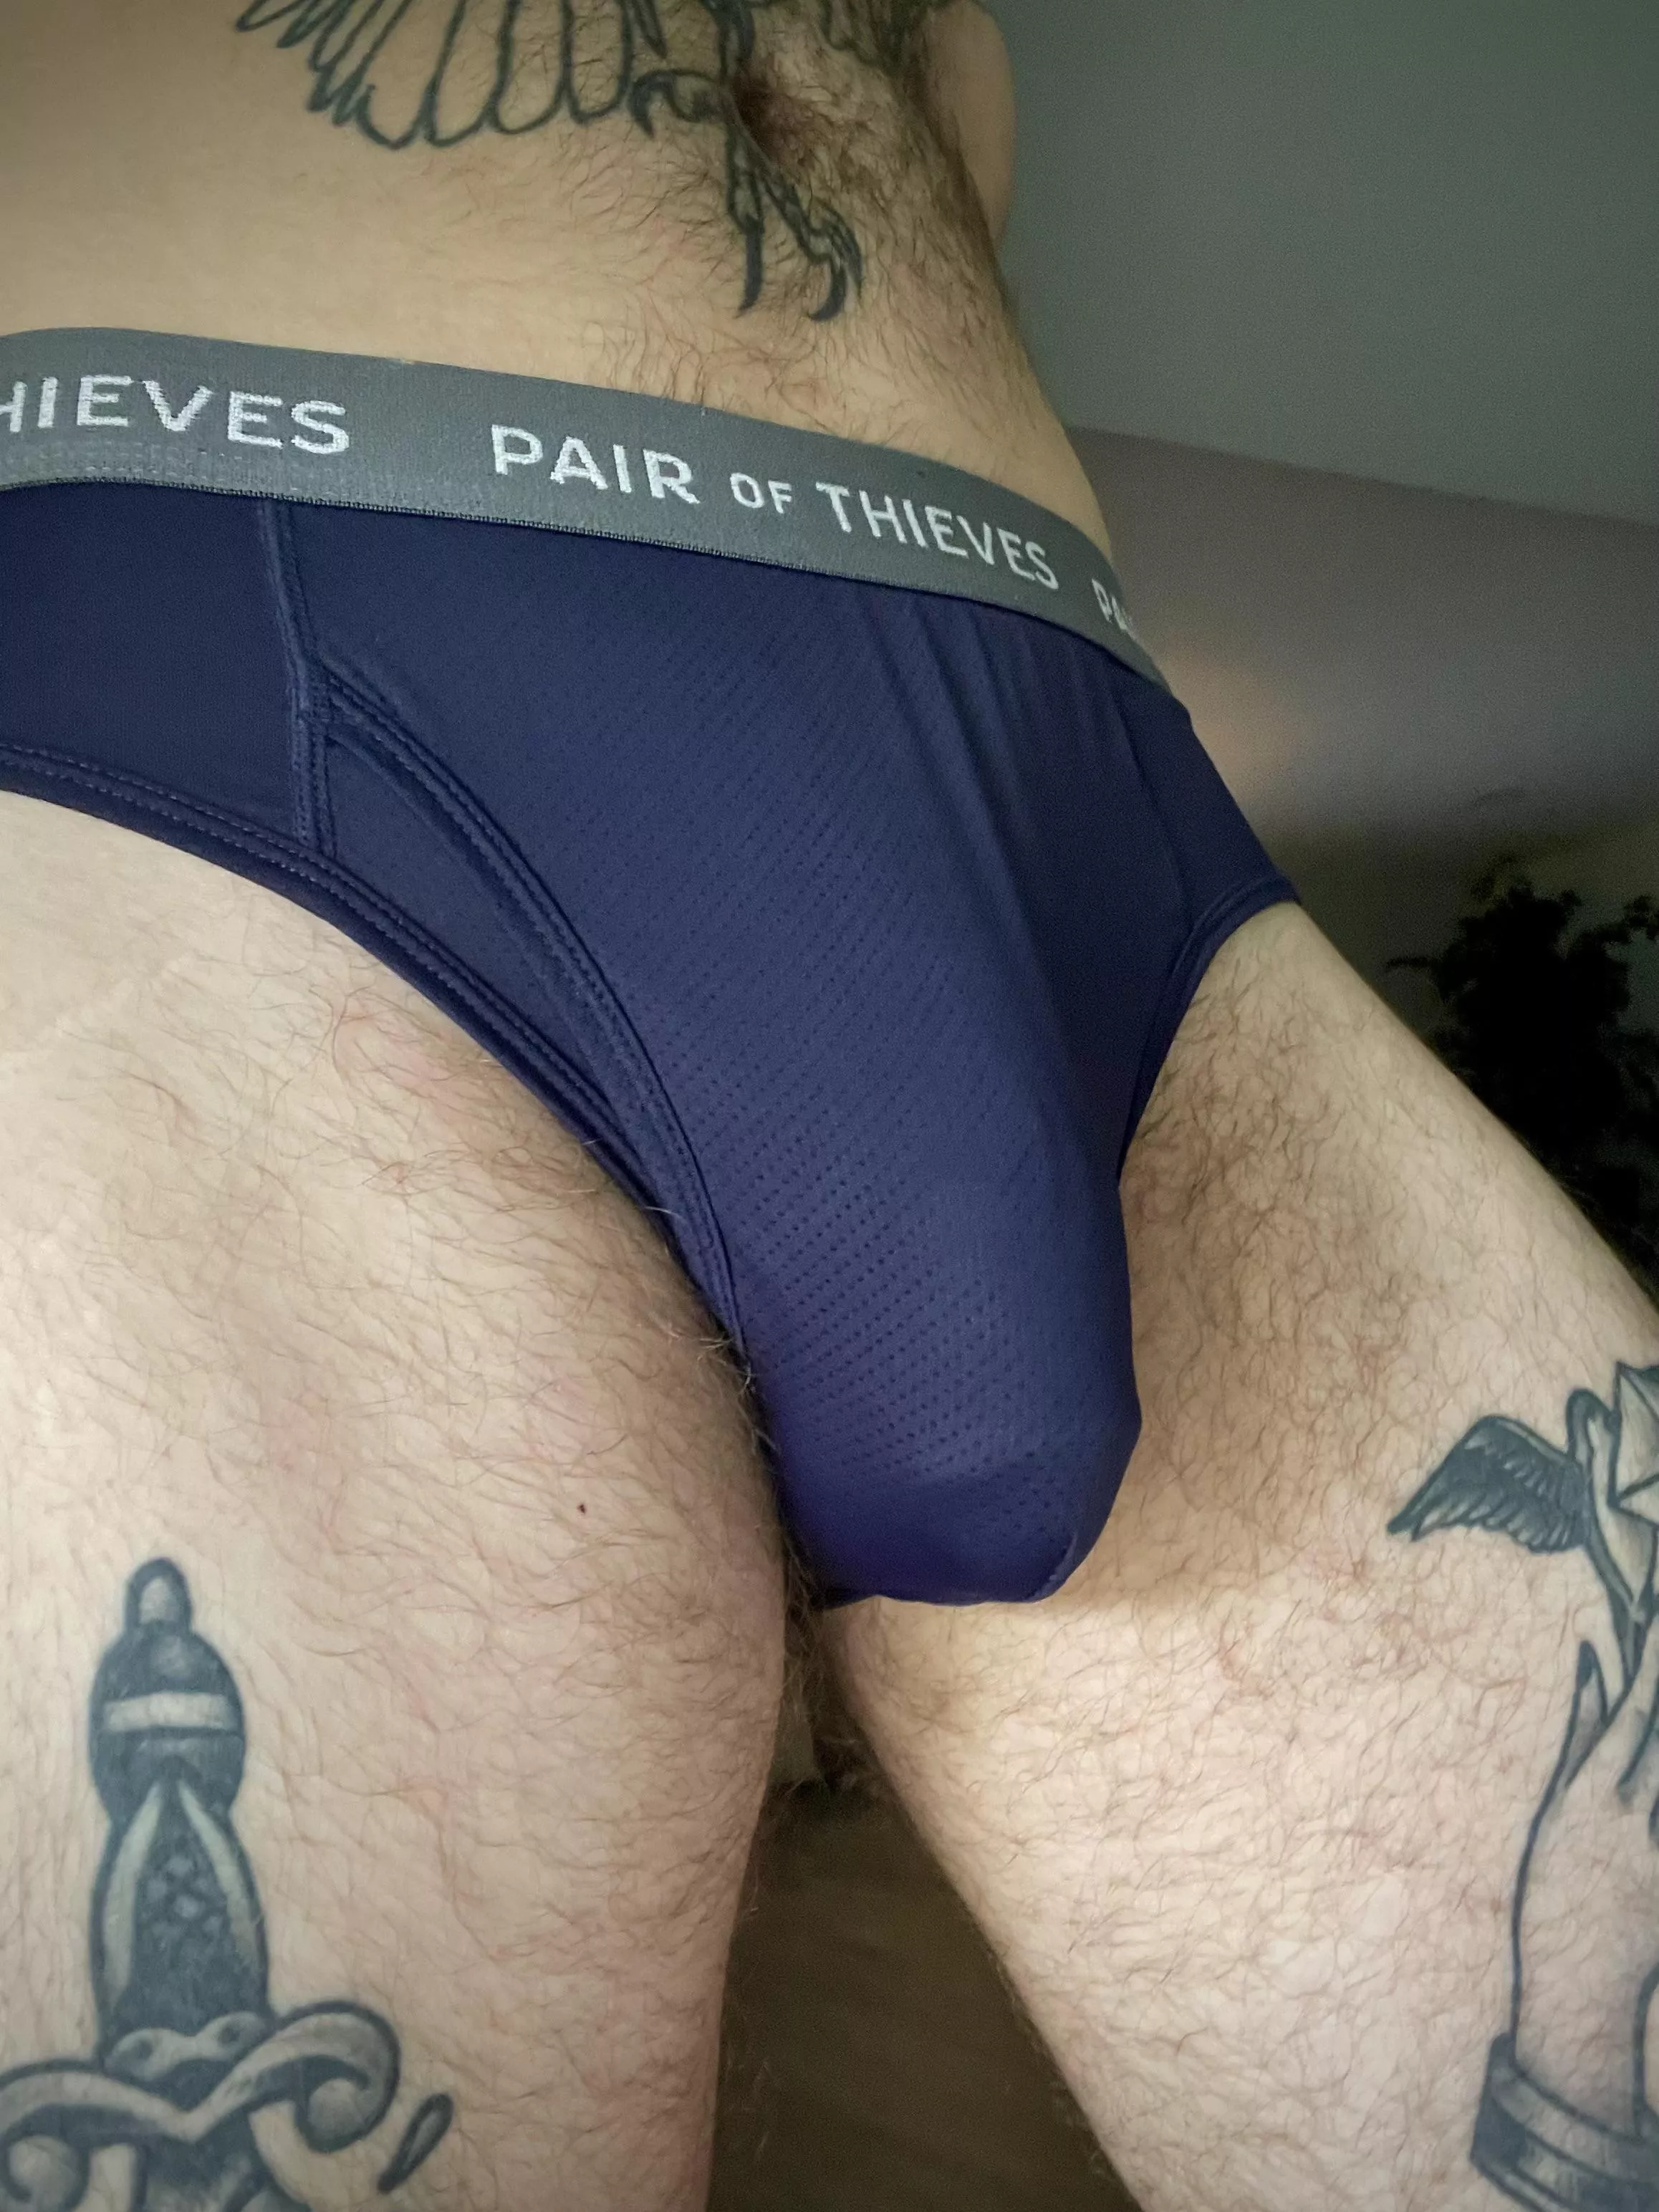 Briefs And Bulges Nudes Asspictures Org